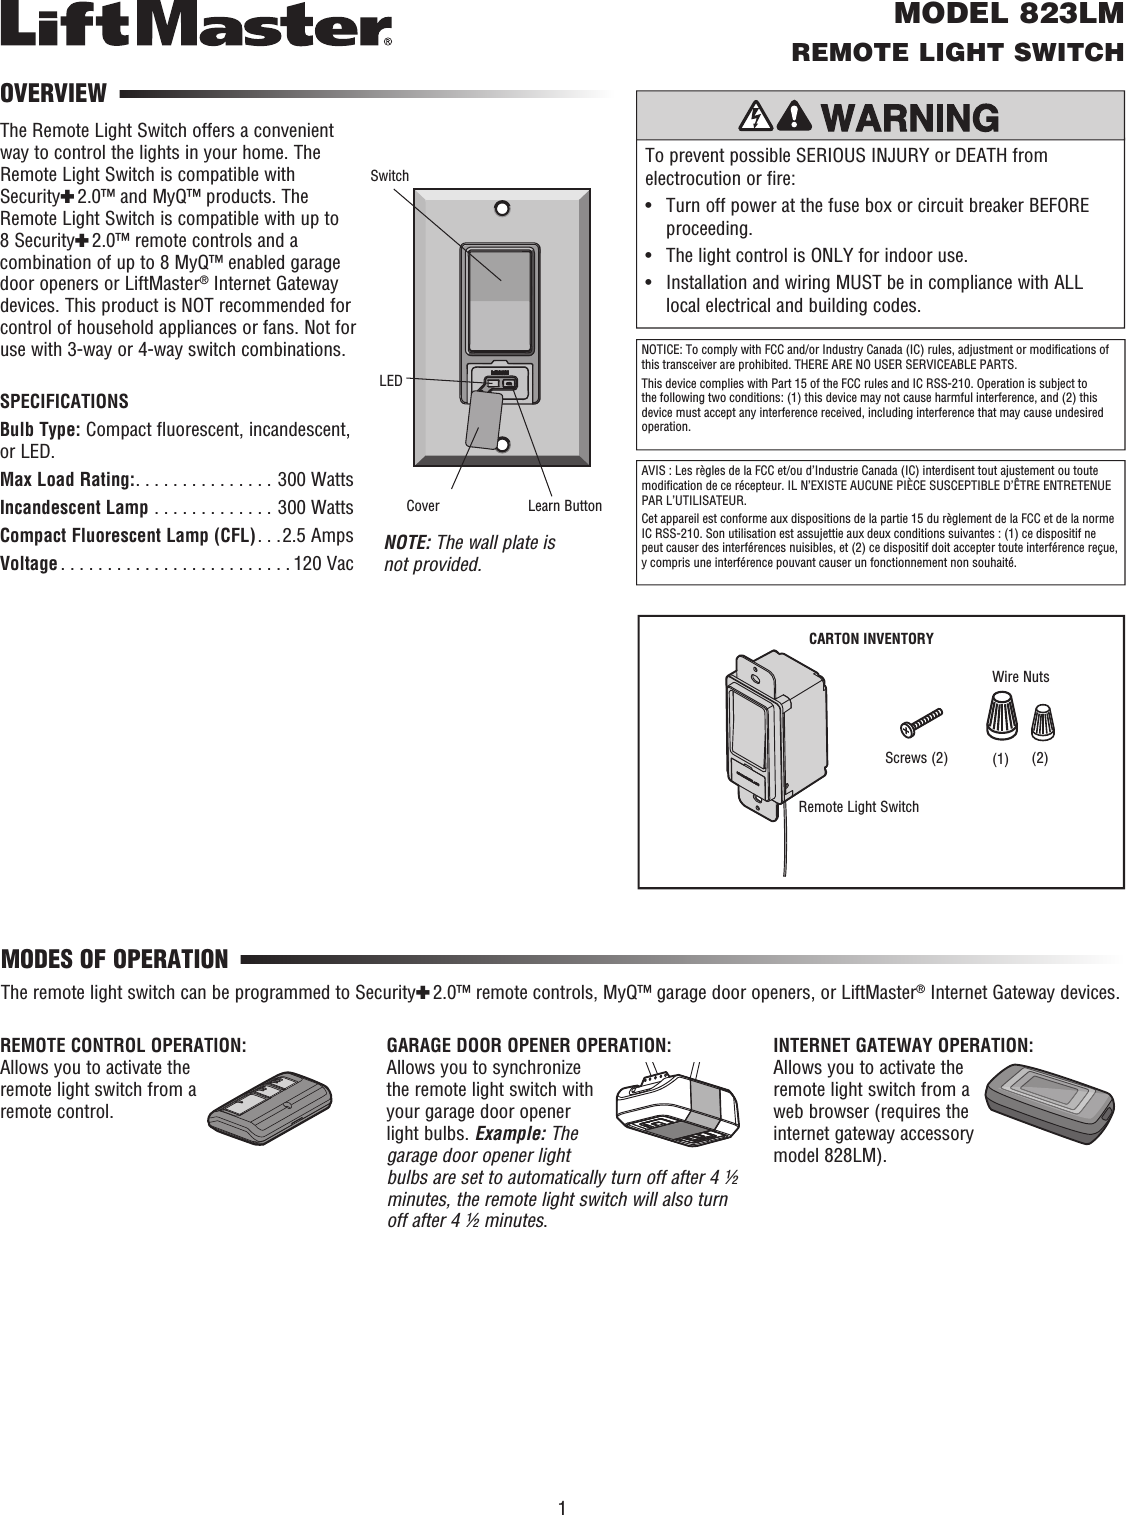 To prevent possible SERIOUS INJURY or DEATH from electrocution or fire:•   Turn off power at the fuse box or circuit breaker BEFORE proceeding. •  The light control is ONLY for indoor use.•   Installation and wiring MUST be in compliance with ALL local electrical and building codes.MODEL 823LMREMOTE LIGHT SWITCHThe Remote Light Switch offers a convenient way to control the lights in your home. The Remote Light Switch is compatible with Security✚ 2.0™ and MyQ™ products. The Remote Light Switch is compatible with up to 8 Security✚ 2.0™ remote controls and a combination of up to 8 MyQ™ enabled garage door openers or LiftMaster® Internet Gateway devices. This product is NOT recommended for control of household appliances or fans. Not for use with 3-way or 4-way switch combinations.SPECIFICATIONSBulb Type: Compact fluorescent, incandescent, or LED.Max Load Rating:. . . . . . . . . . . . . . . 300 WattsIncandescent Lamp  . . . . . . . . . . . . . 300 WattsCompact Fluorescent Lamp (CFL). . .2.5 AmpsVoltage . . . . . . . . . . . . . . . . . . . . . . . . . 120 Vac NOTE: The wall plate is not provided.OVERVIEWMODES OF OPERATIONREMOTE CONTROL OPERATION: Allows you to activate the remote light switch from a remote control.The remote light switch can be programmed to Security✚ 2.0™ remote controls, MyQ™ garage door openers, or LiftMaster® Internet Gateway devices.GARAGE DOOR OPENER OPERATION: Allows you to synchronize the remote light switch with your garage door opener light bulbs. Example: The garage door opener light bulbs are set to automatically turn off after 4 ½ minutes, the remote light switch will also turn off after 4 ½ minutes.INTERNET GATEWAY OPERATION: Allows you to activate the remote light switch from a web browser (requires the internet gateway accessory model 828LM).SwitchLEDNOTICE: To comply with FCC and/or Industry Canada (IC) rules, adjustment or modiﬁ cations of this transceiver are prohibited. THERE ARE NO USER SERVICEABLE PARTS.This device complies with Part 15 of the FCC rules and IC RSS-210. Operation is subject to the following two conditions: (1) this device may not cause harmful interference, and (2) this device must accept any interference received, including interference that may cause undesired operation.AVIS : Les règles de la FCC et/ou d’Industrie Canada (IC) interdisent tout ajustement ou toute modiﬁ cation de ce récepteur. IL N’EXISTE AUCUNE PIÈCE SUSCEPTIBLE D’ÊTRE ENTRETENUE PAR L’UTILISATEUR.Cet appareil est conforme aux dispositions de la partie 15 du règlement de la FCC et de la norme IC RSS-210. Son utilisation est assujettie aux deux conditions suivantes : (1) ce dispositif ne peut causer des interférences nuisibles, et (2) ce dispositif doit accepter toute interférence reçue, y compris une interférence pouvant causer un fonctionnement non souhaité.Learn ButtonCoverCARTON INVENTORYScrews (2)Remote Light SwitchWire Nuts1(2)(1)